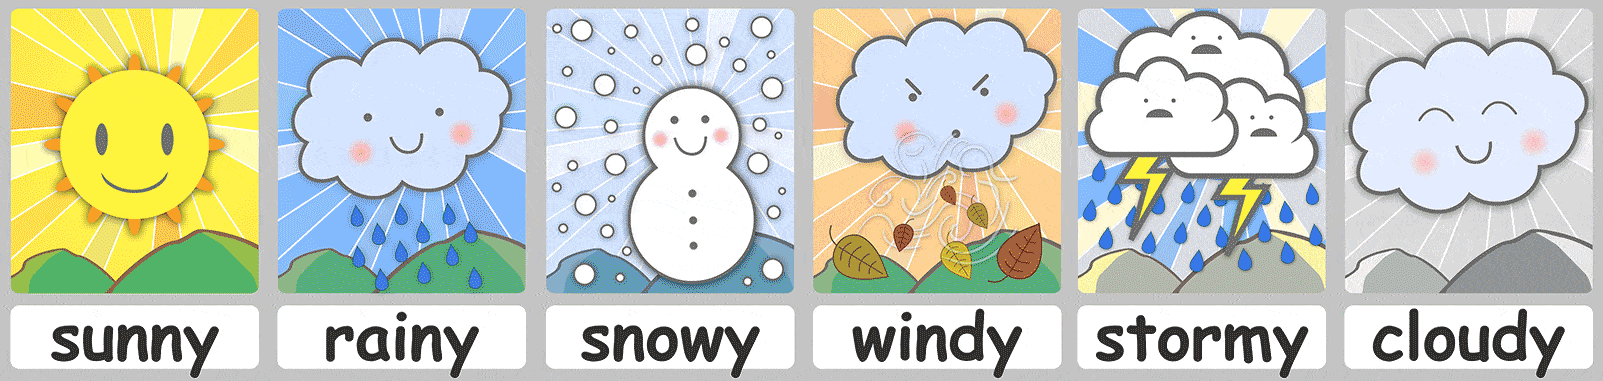 weather-flashcards-teach-the-weather-free-flashcards-posters